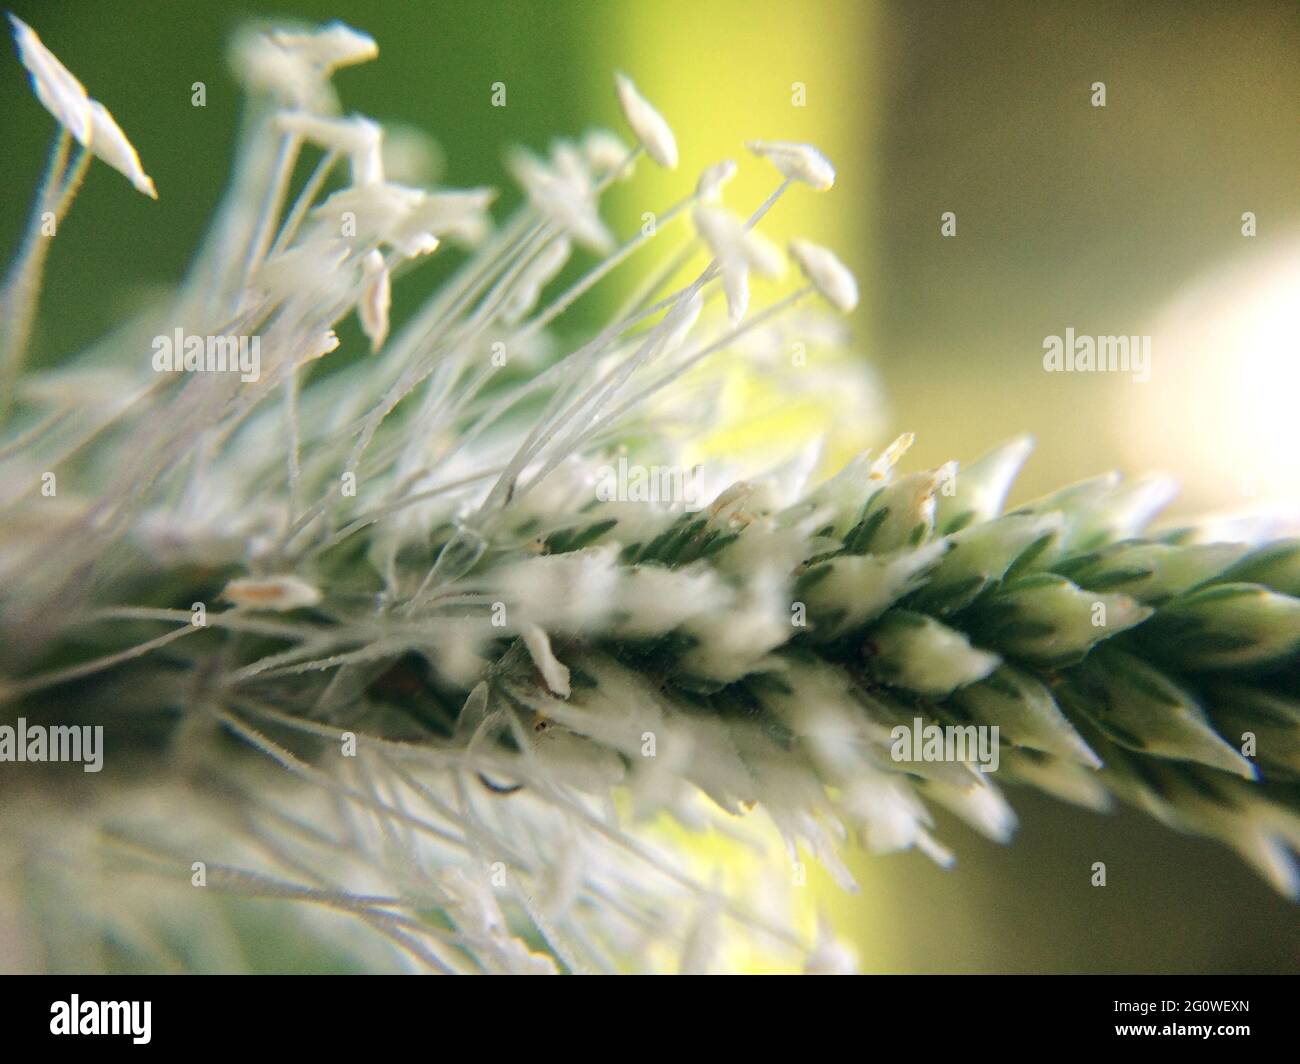 Plantain flower blooming close-up. Blurred macro photo of plantain ear petals. Stock Photo